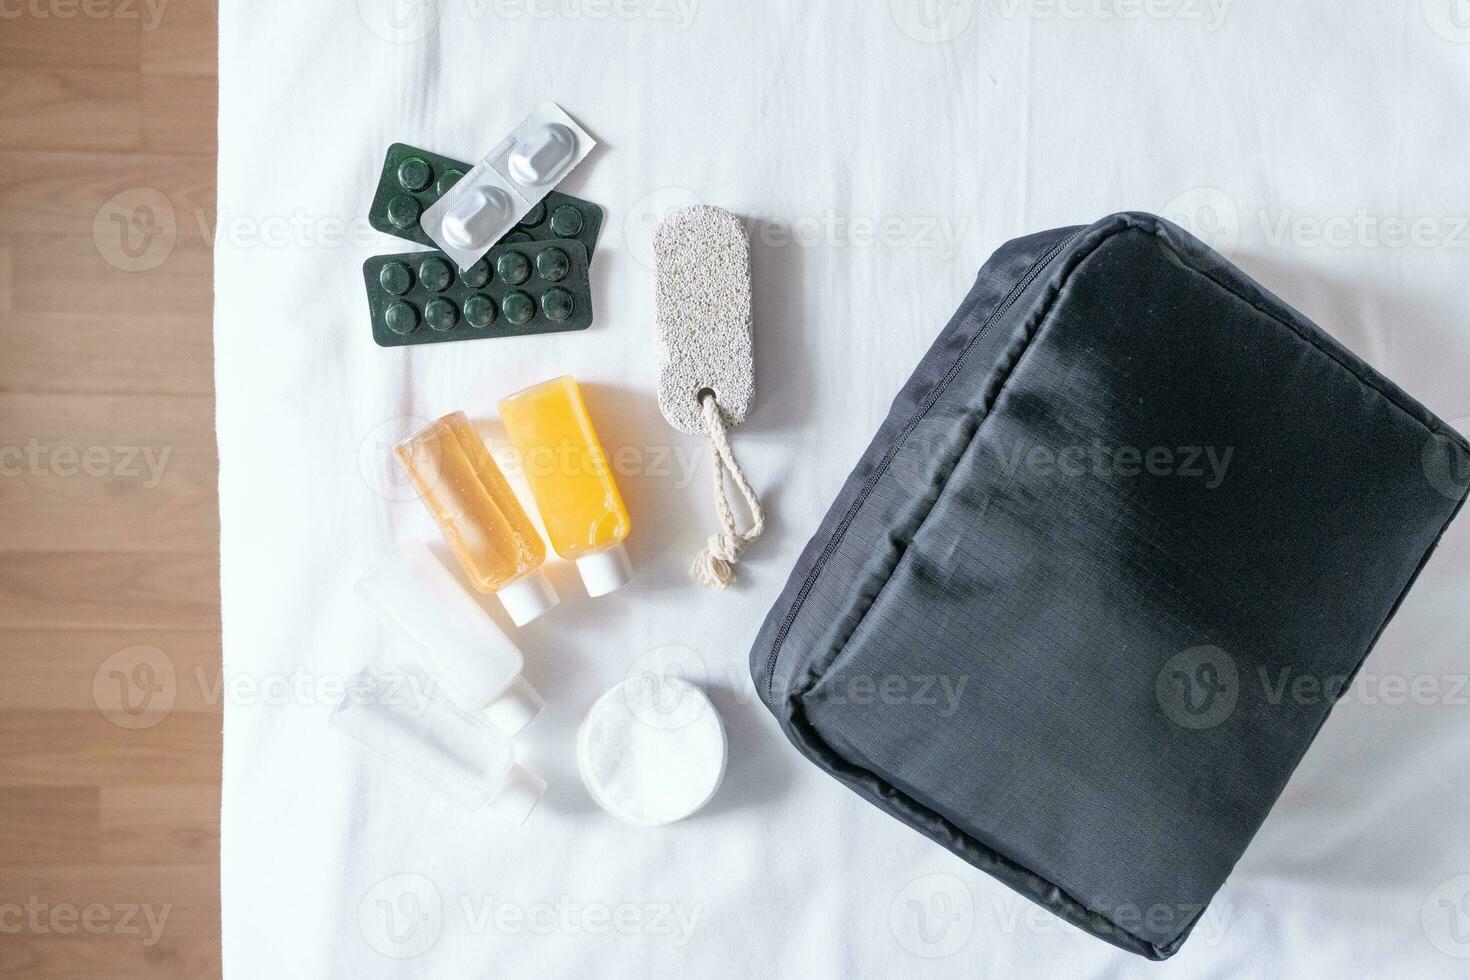 Travel cosmetics kit on bed , top view photo